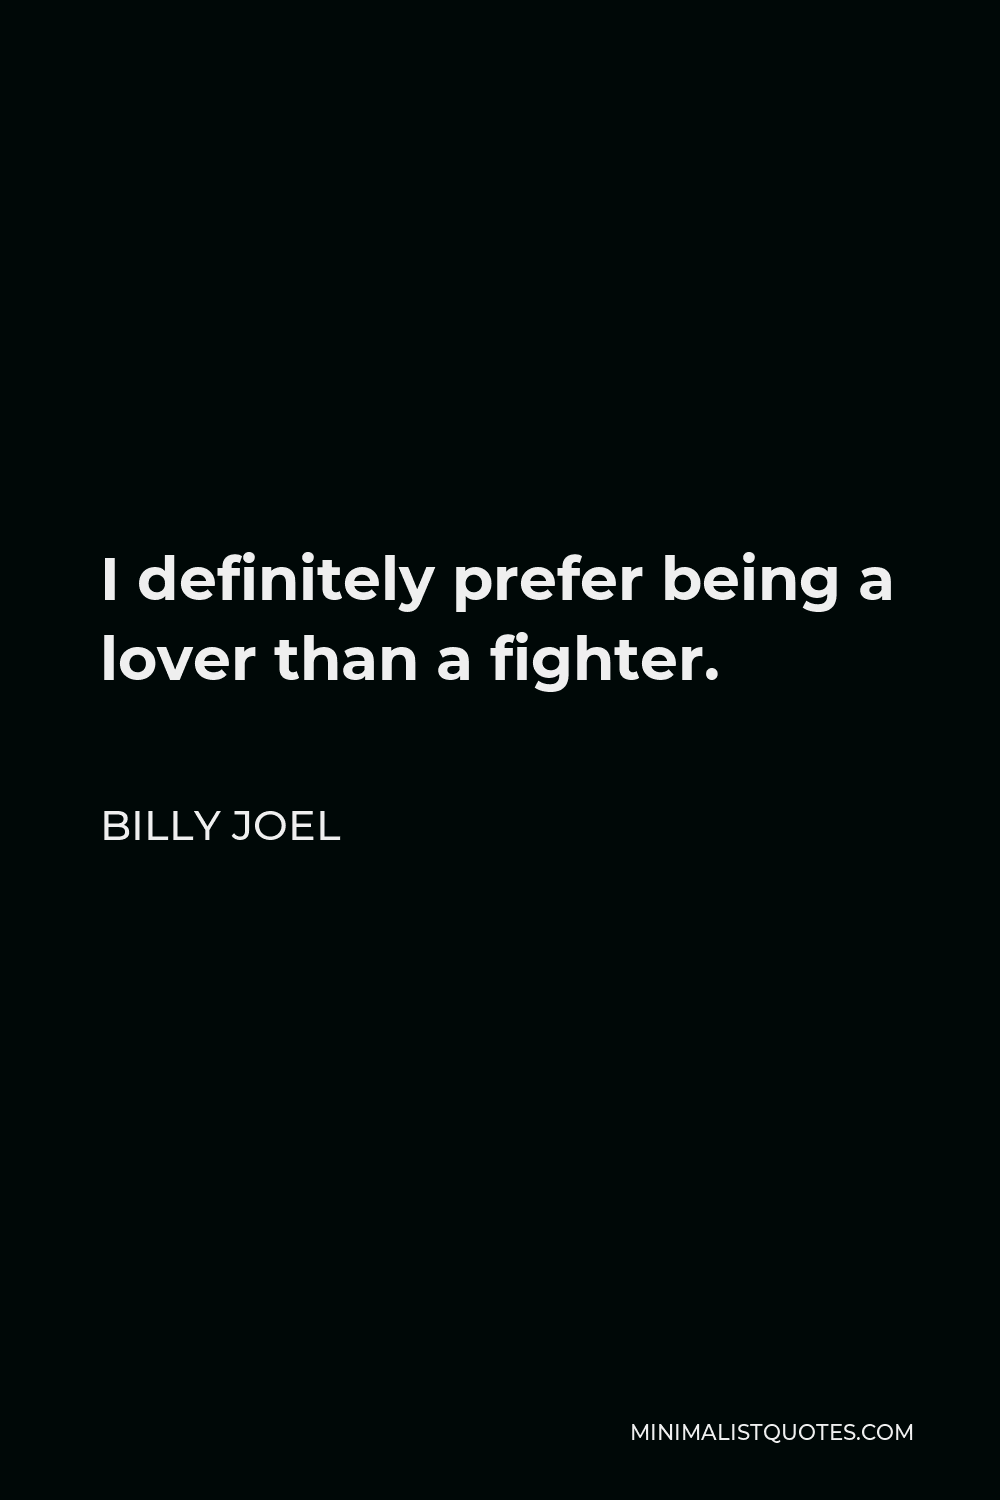 Billy Joel Quote - I definitely prefer being a lover than a fighter.